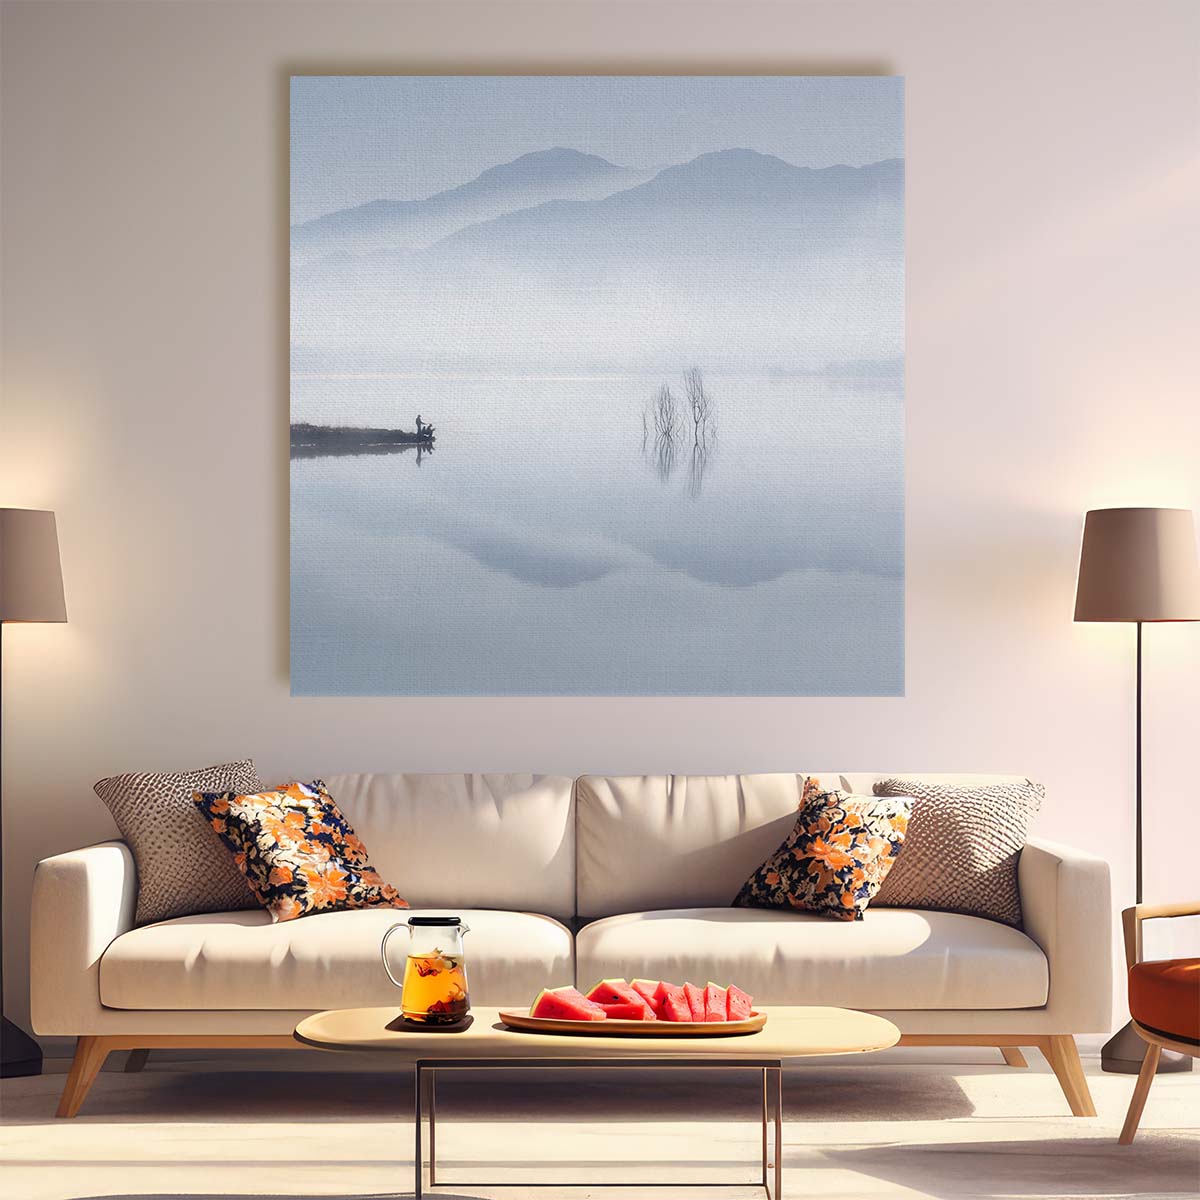 Serene Misty Lake Fishing Pastel Landscape Photography Wall Art by Luxuriance Designs. Made in USA.